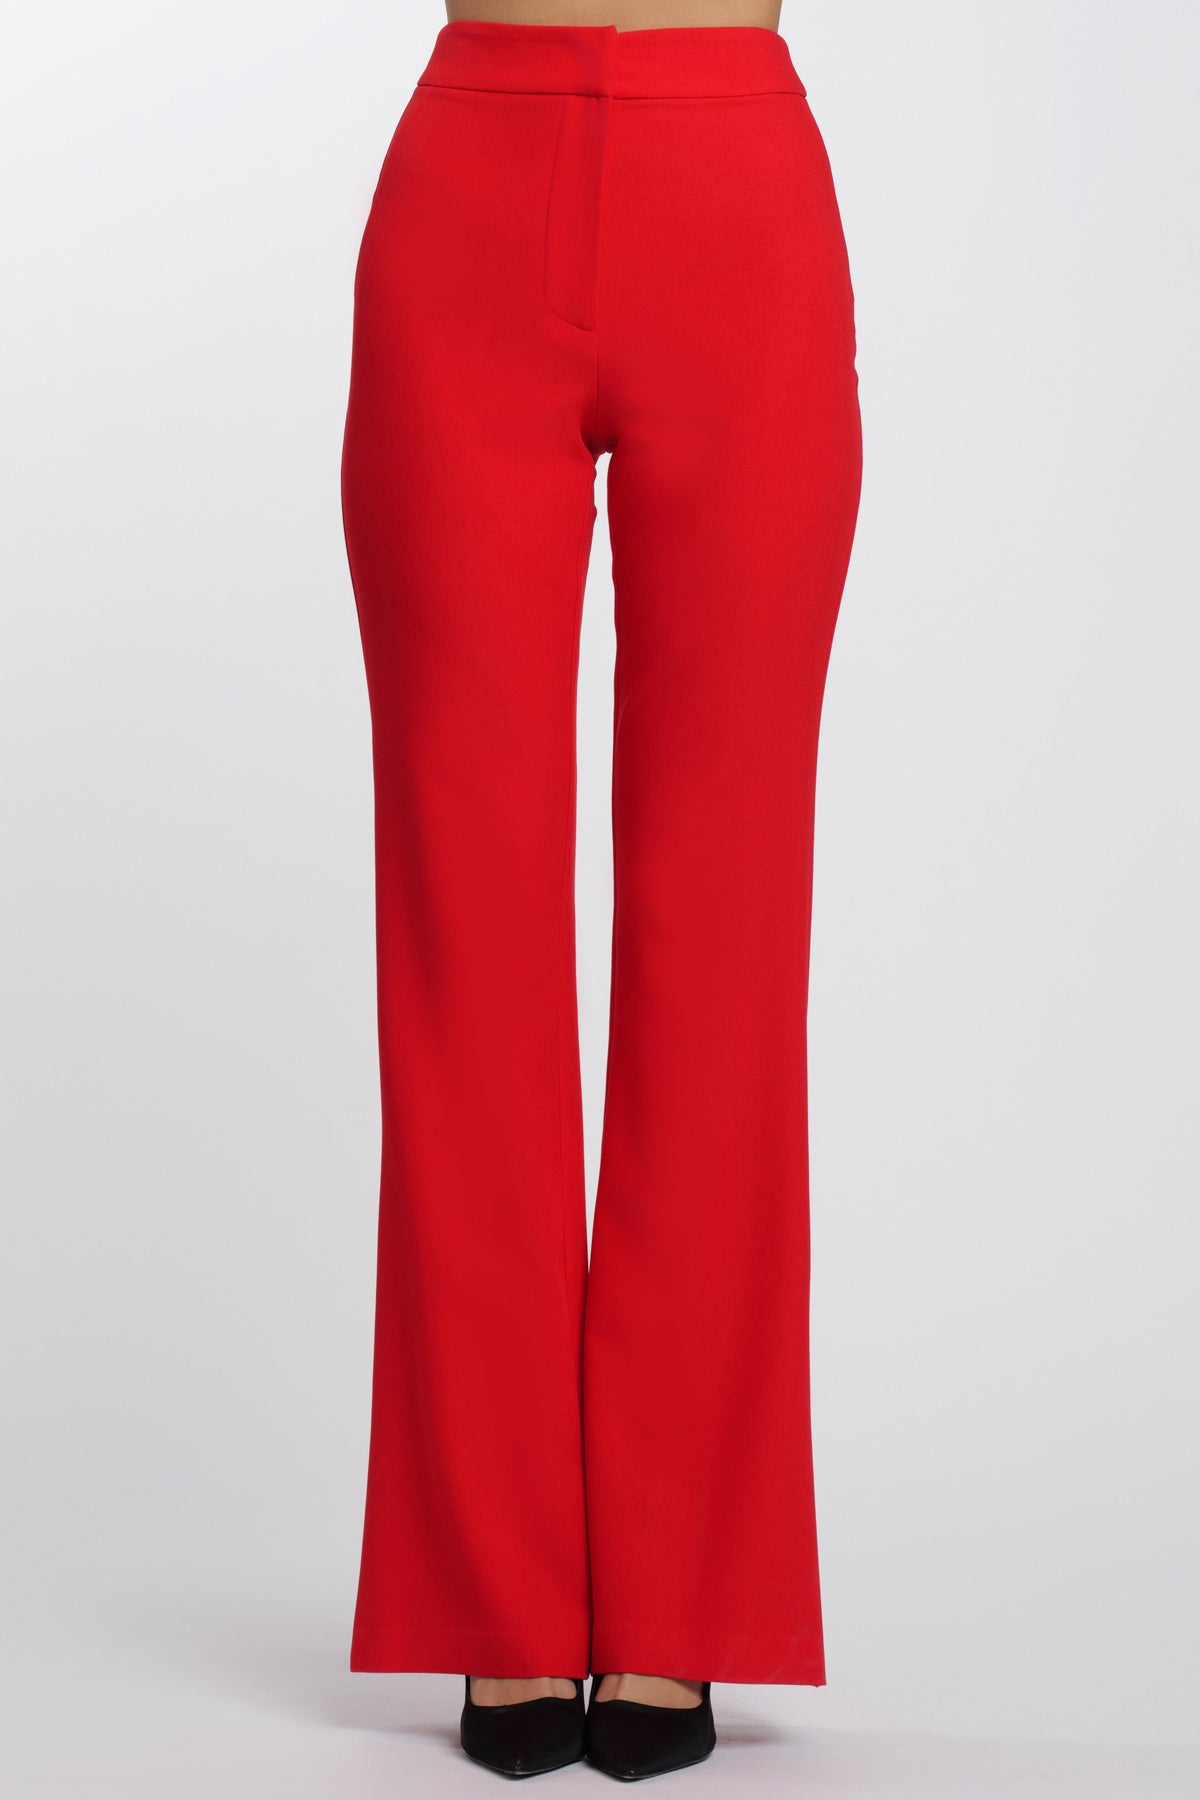 Red Kiss Pants